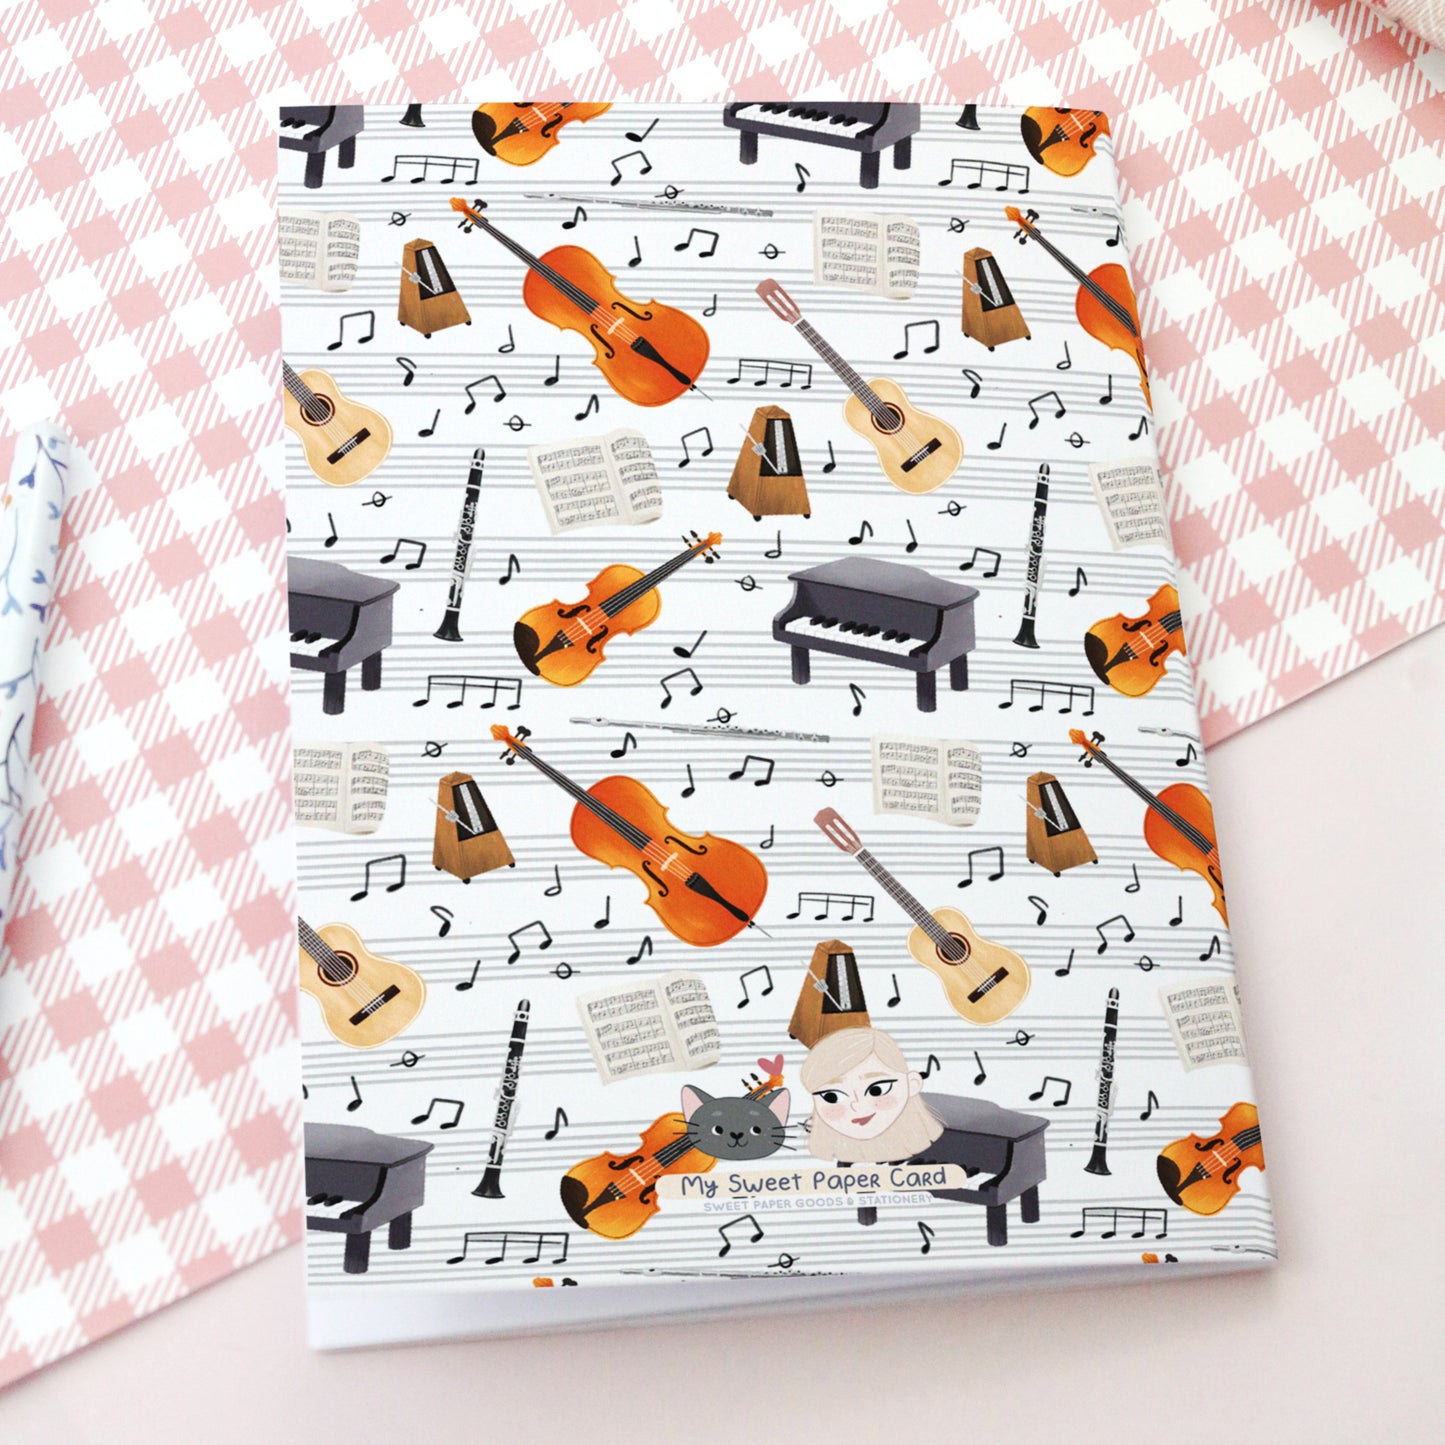 Music Lessons soft notebook - Stationery gift for music lovers